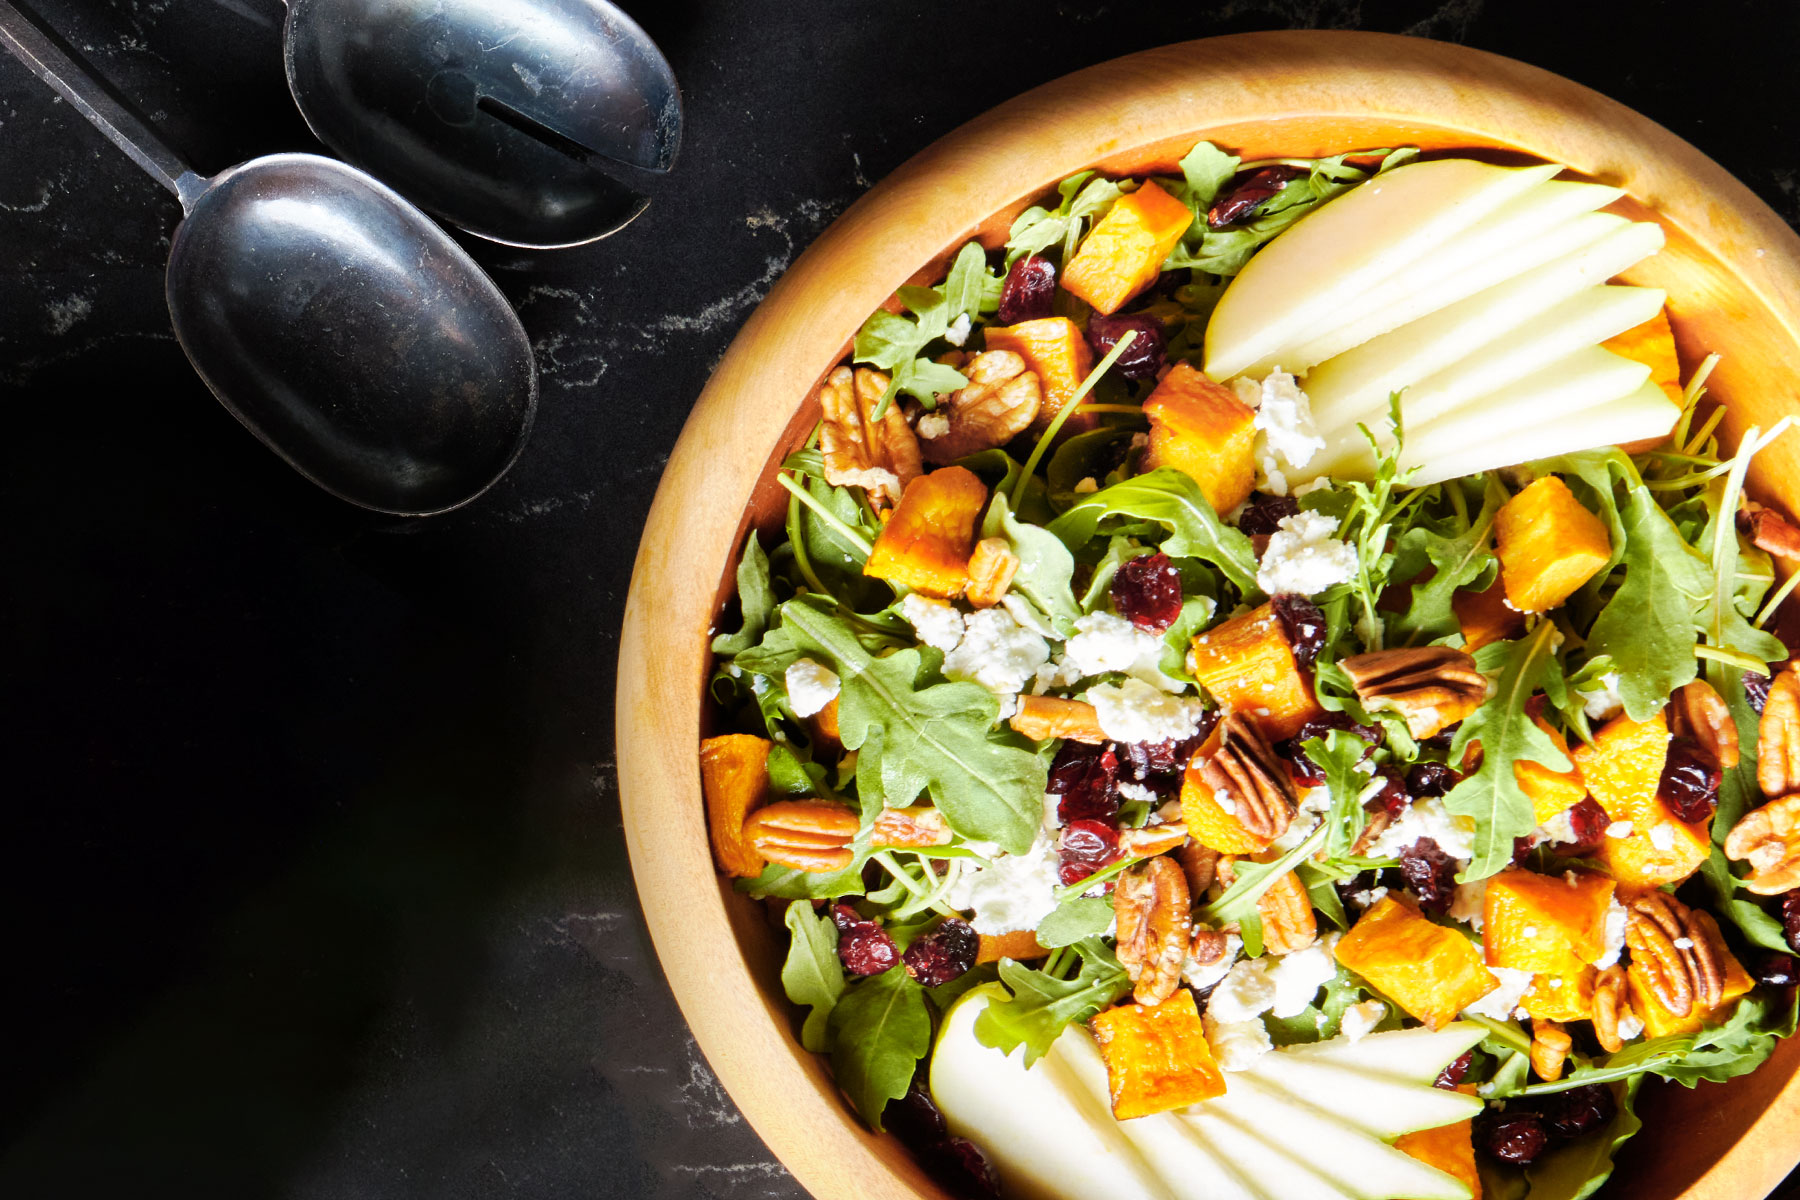 Arugula, sweet potato, pear, and dried cranberry salad with a maple-mustard dressing